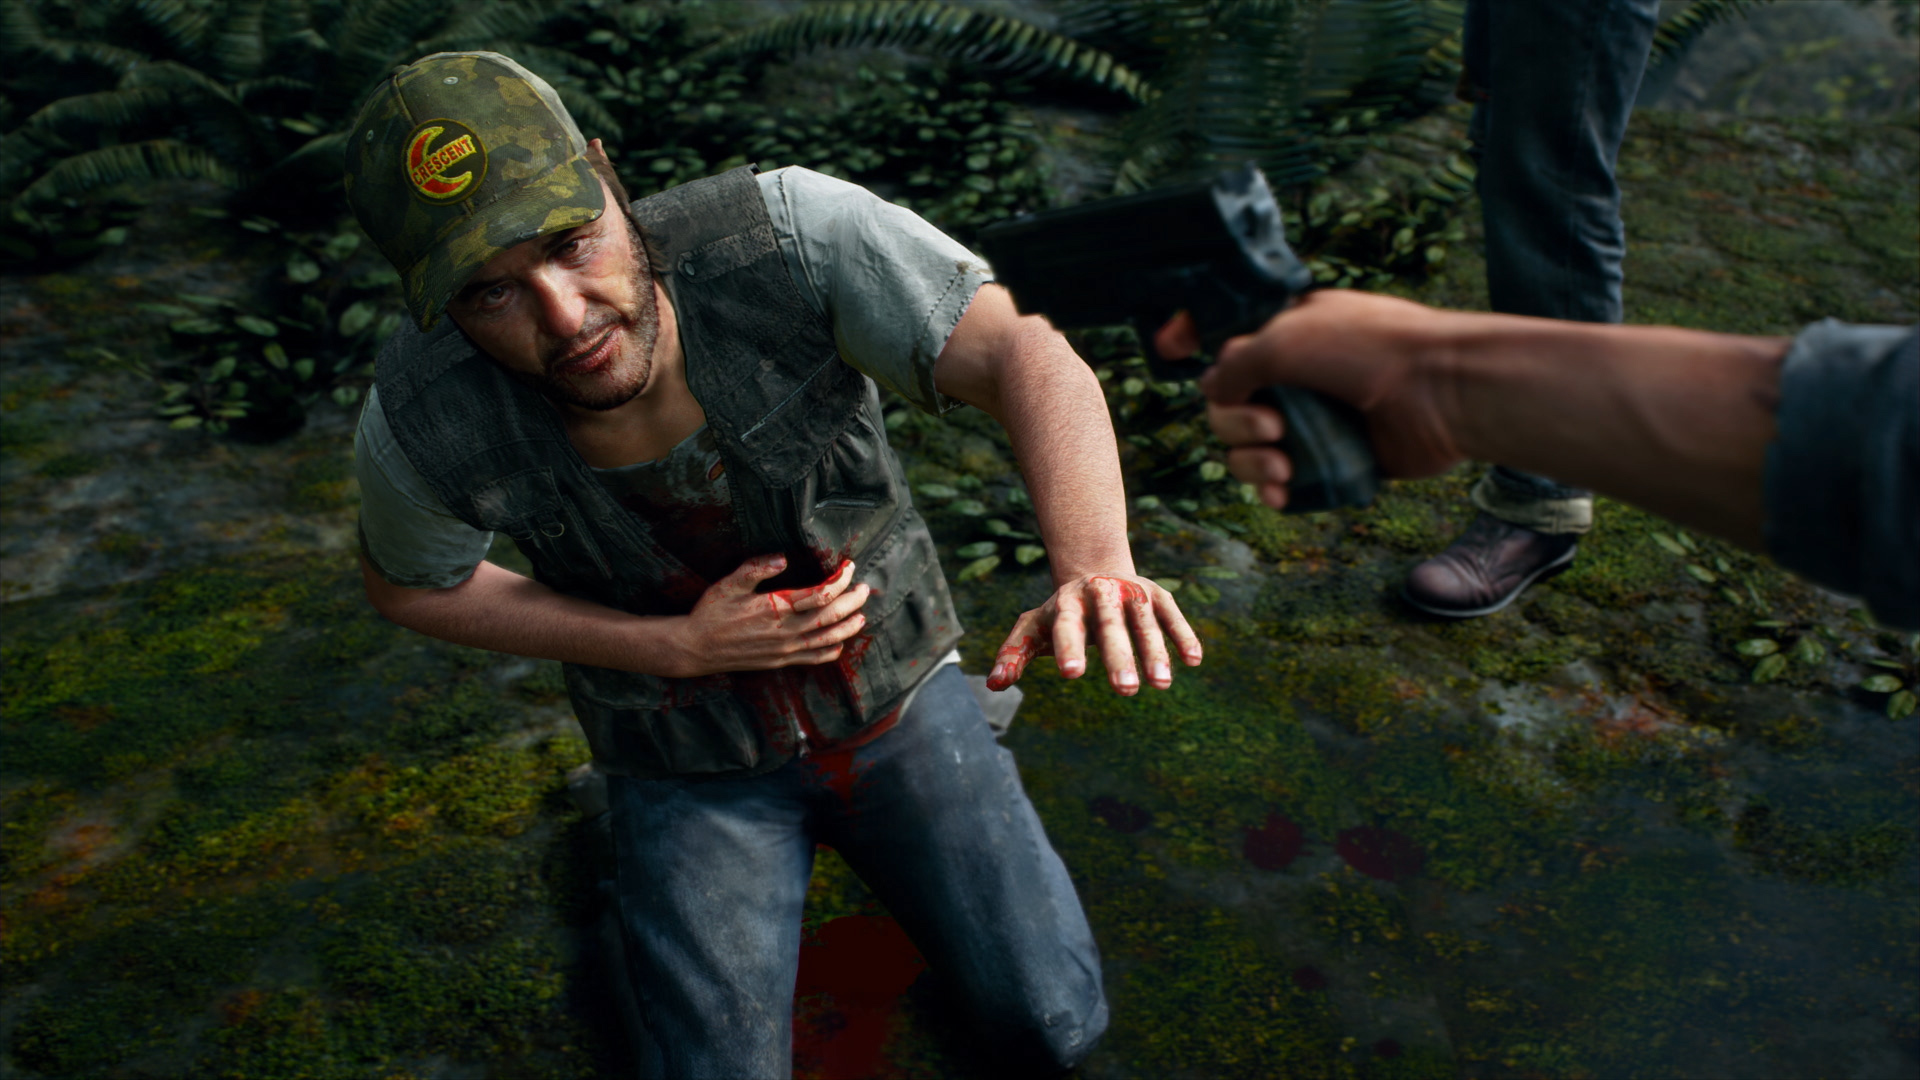 All The Latest Days Gone News, Reviews, Trailers & Guides